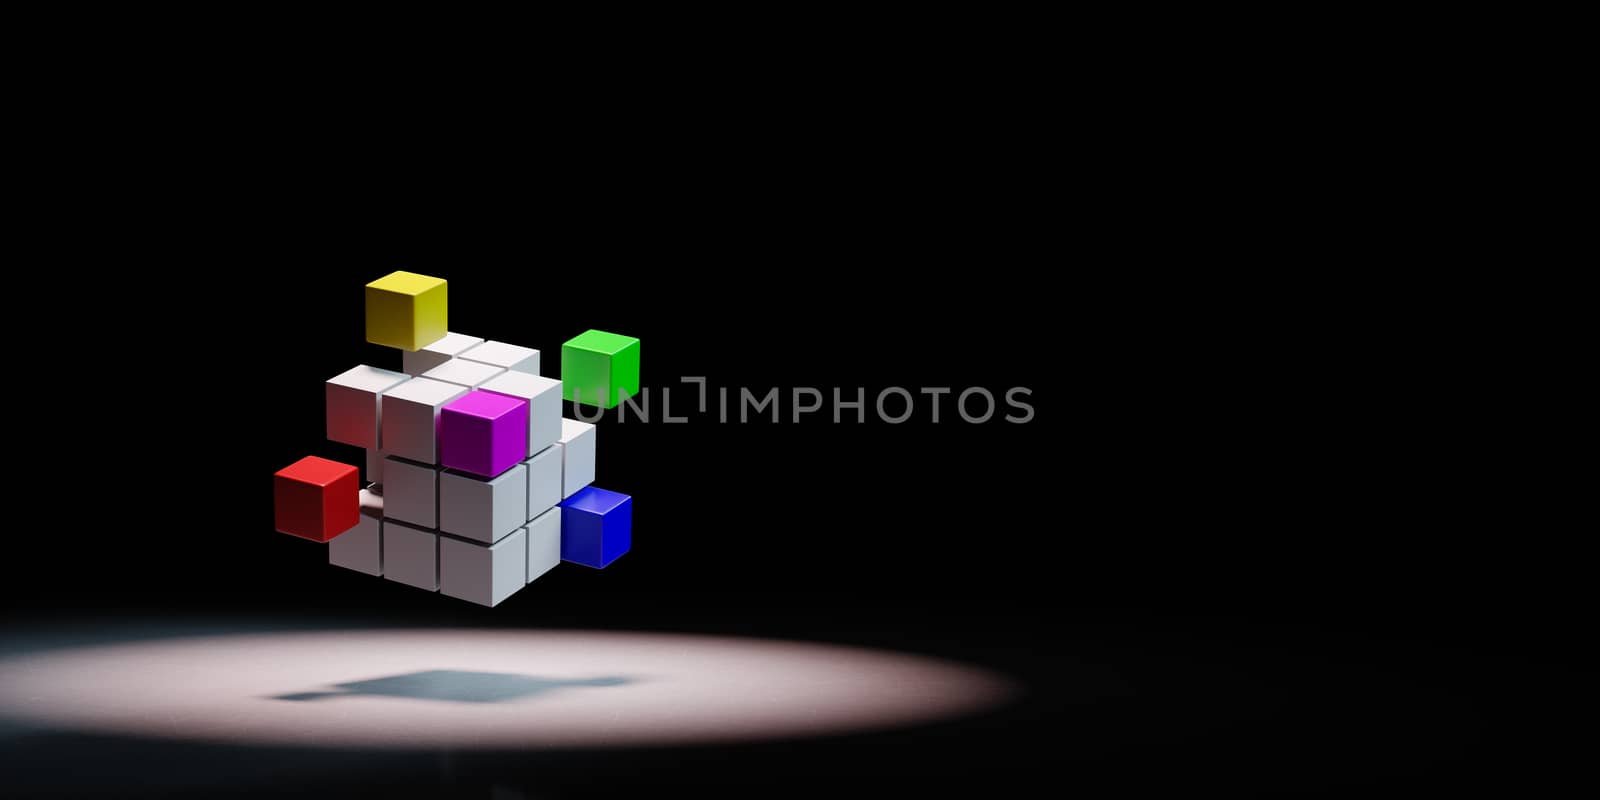 Combining Multicolor Cubes Spotlighted on Black Background with Copy Space 3D Illustration